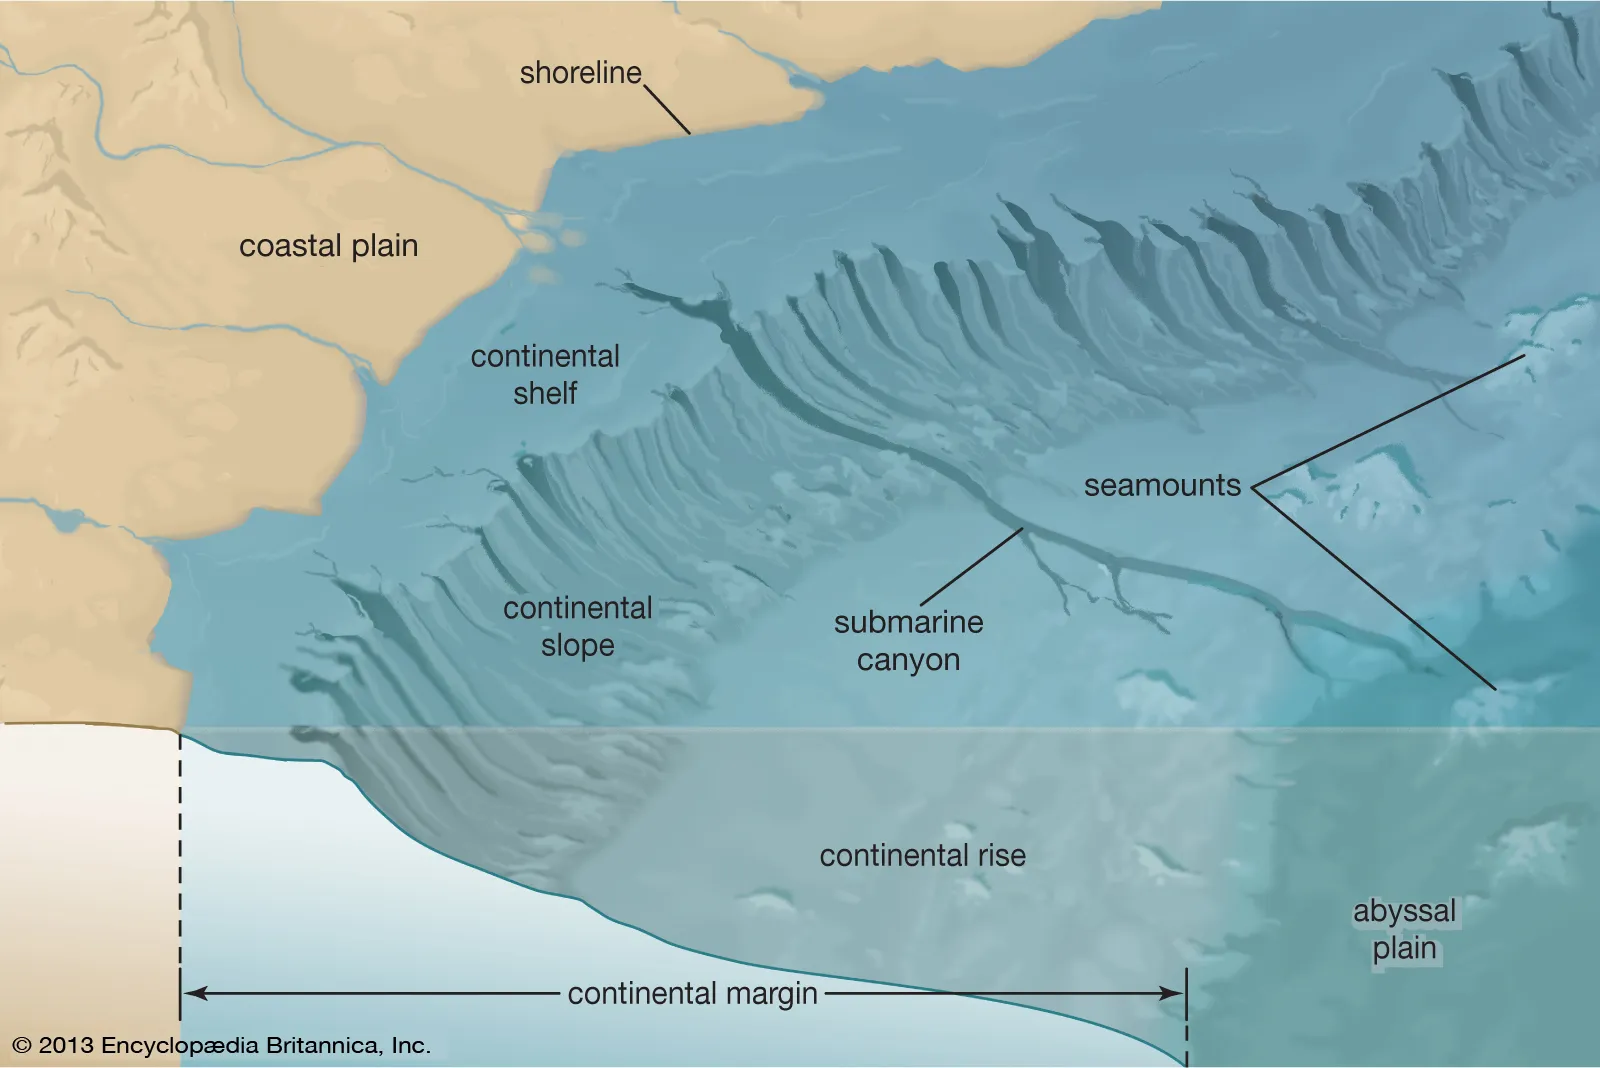 pitch-continental-shelf-slope-way-transition-region.png